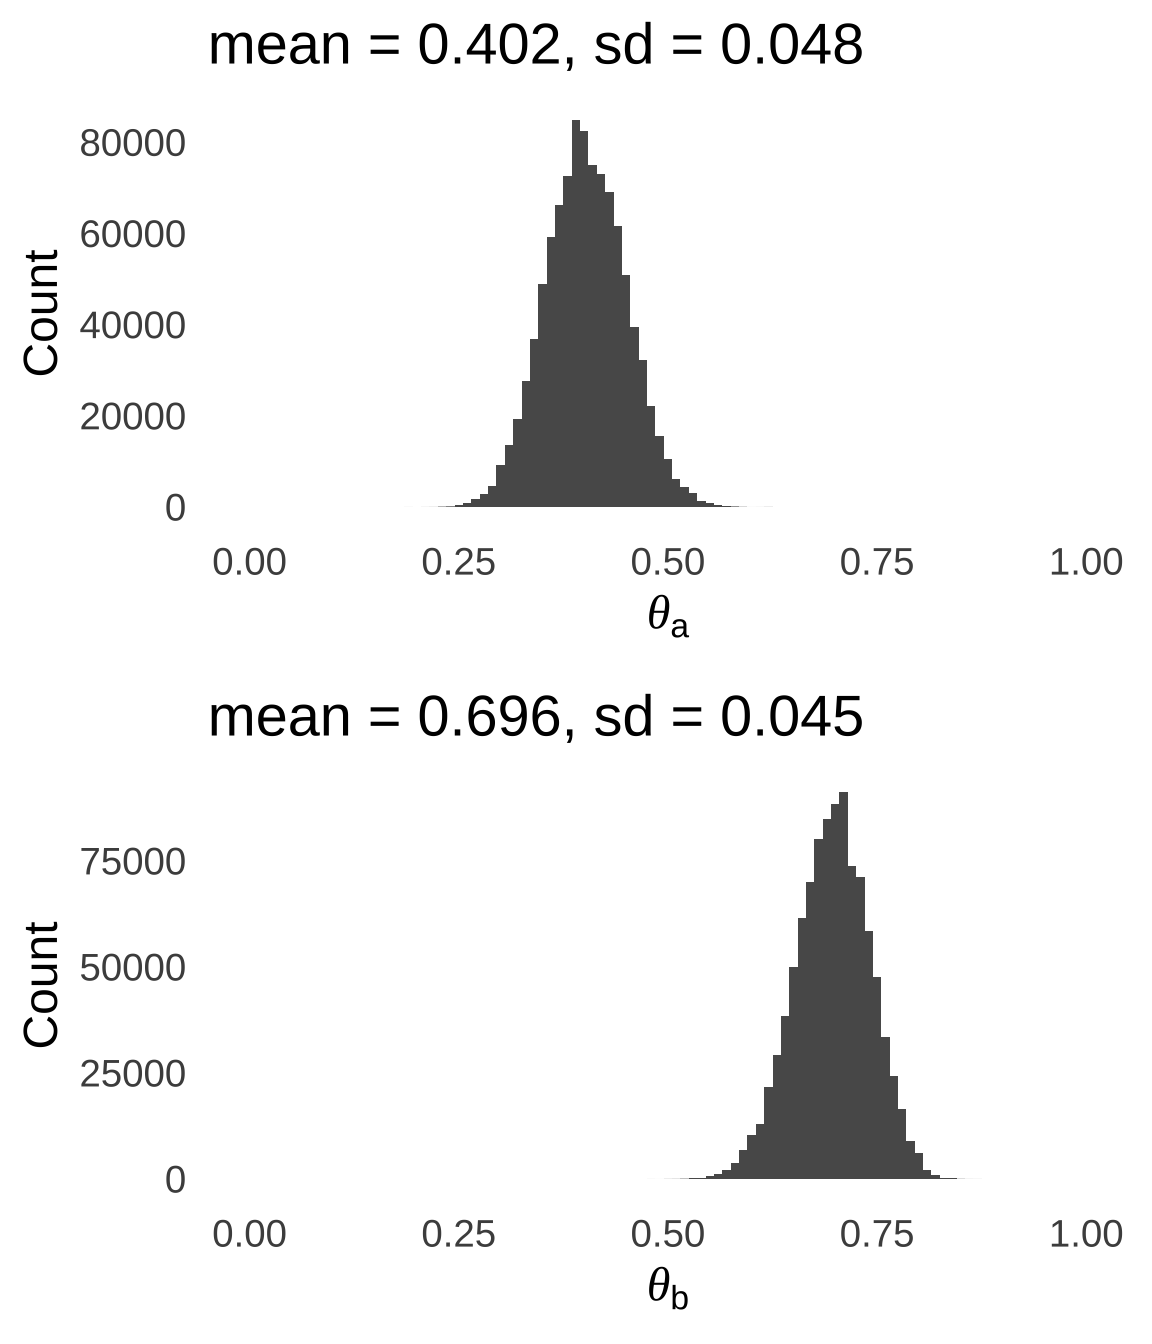 Posterior Distributions of $\theta_a$ and $\theta_b$ Given the Observed Data